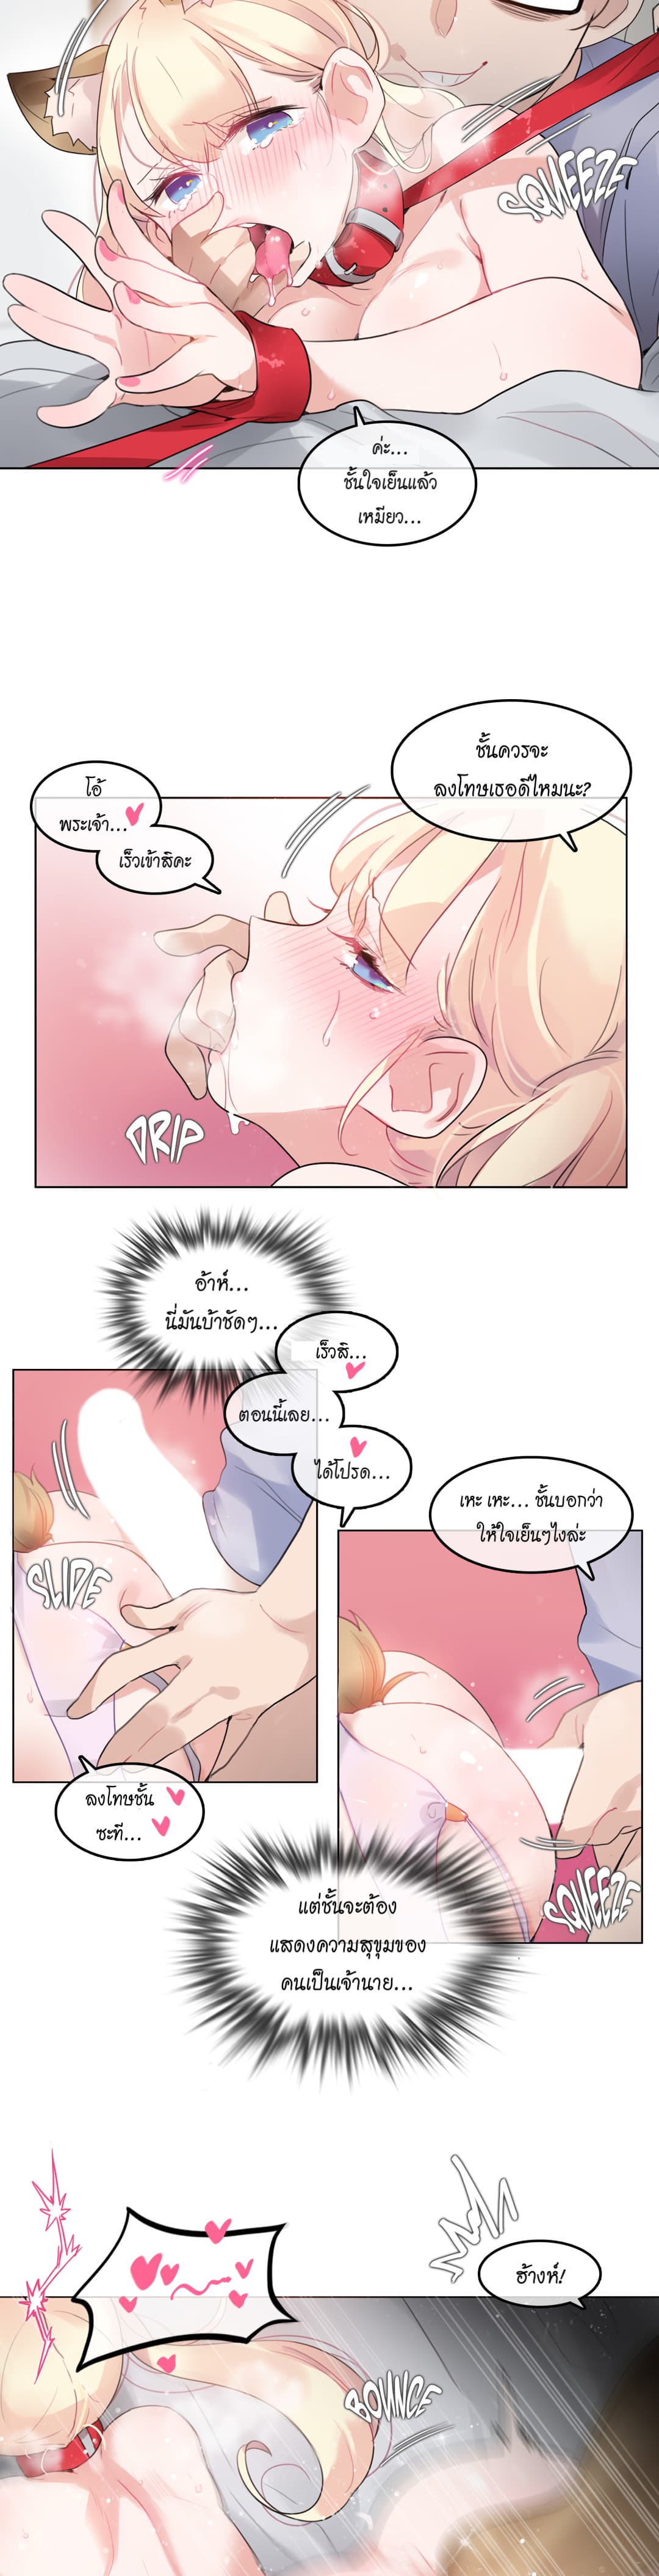 A Pervert’s Daily Life 40 (5)